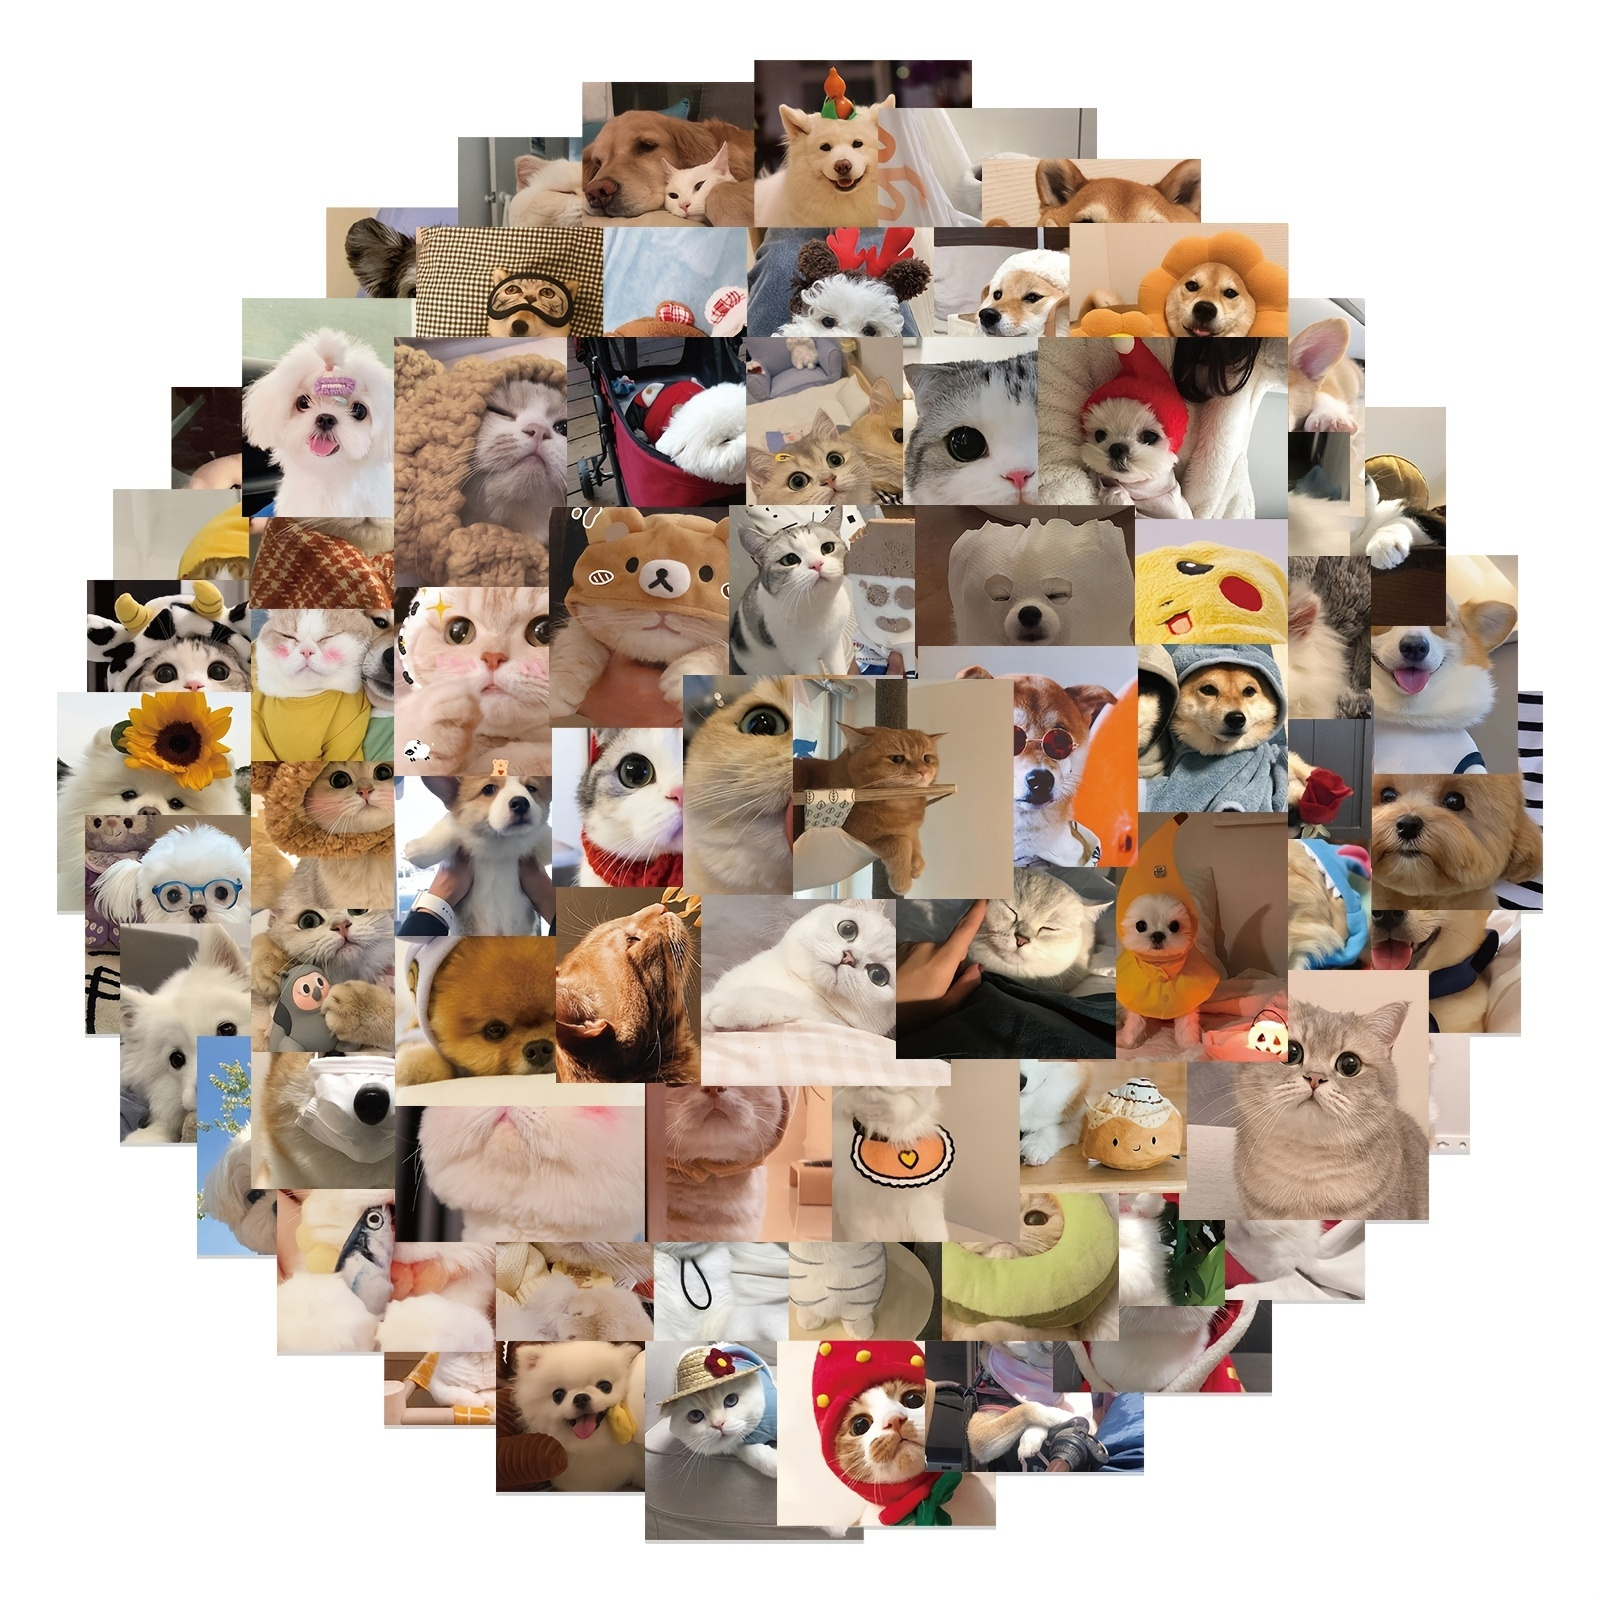 

100pcs Cat And Dog Expression Doodle Stickers, Decorative Stickers For Skateboard Guitar Helmet Motorcycle Water Cup Mobile Phone Case Suitcase Pen Guitar Notebook, Diy Waterproof Stickers